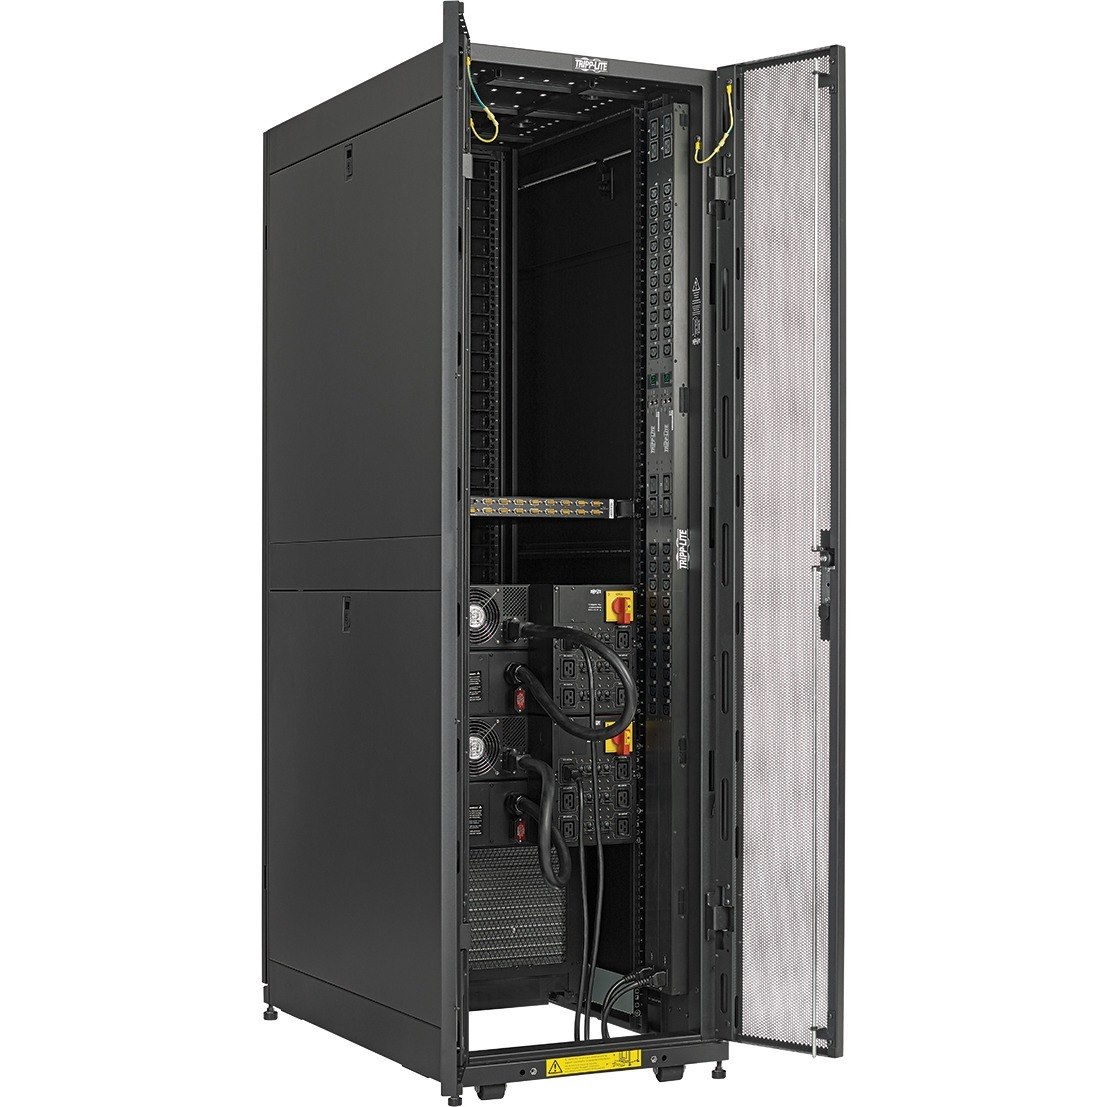 Tripp Lite by Eaton EdgeReady&trade; Micro Data Center - 30U, (2) 10 kVA UPS Systems (N+N), Network Management and Dual PDUs, 208/240V or 230V Kit